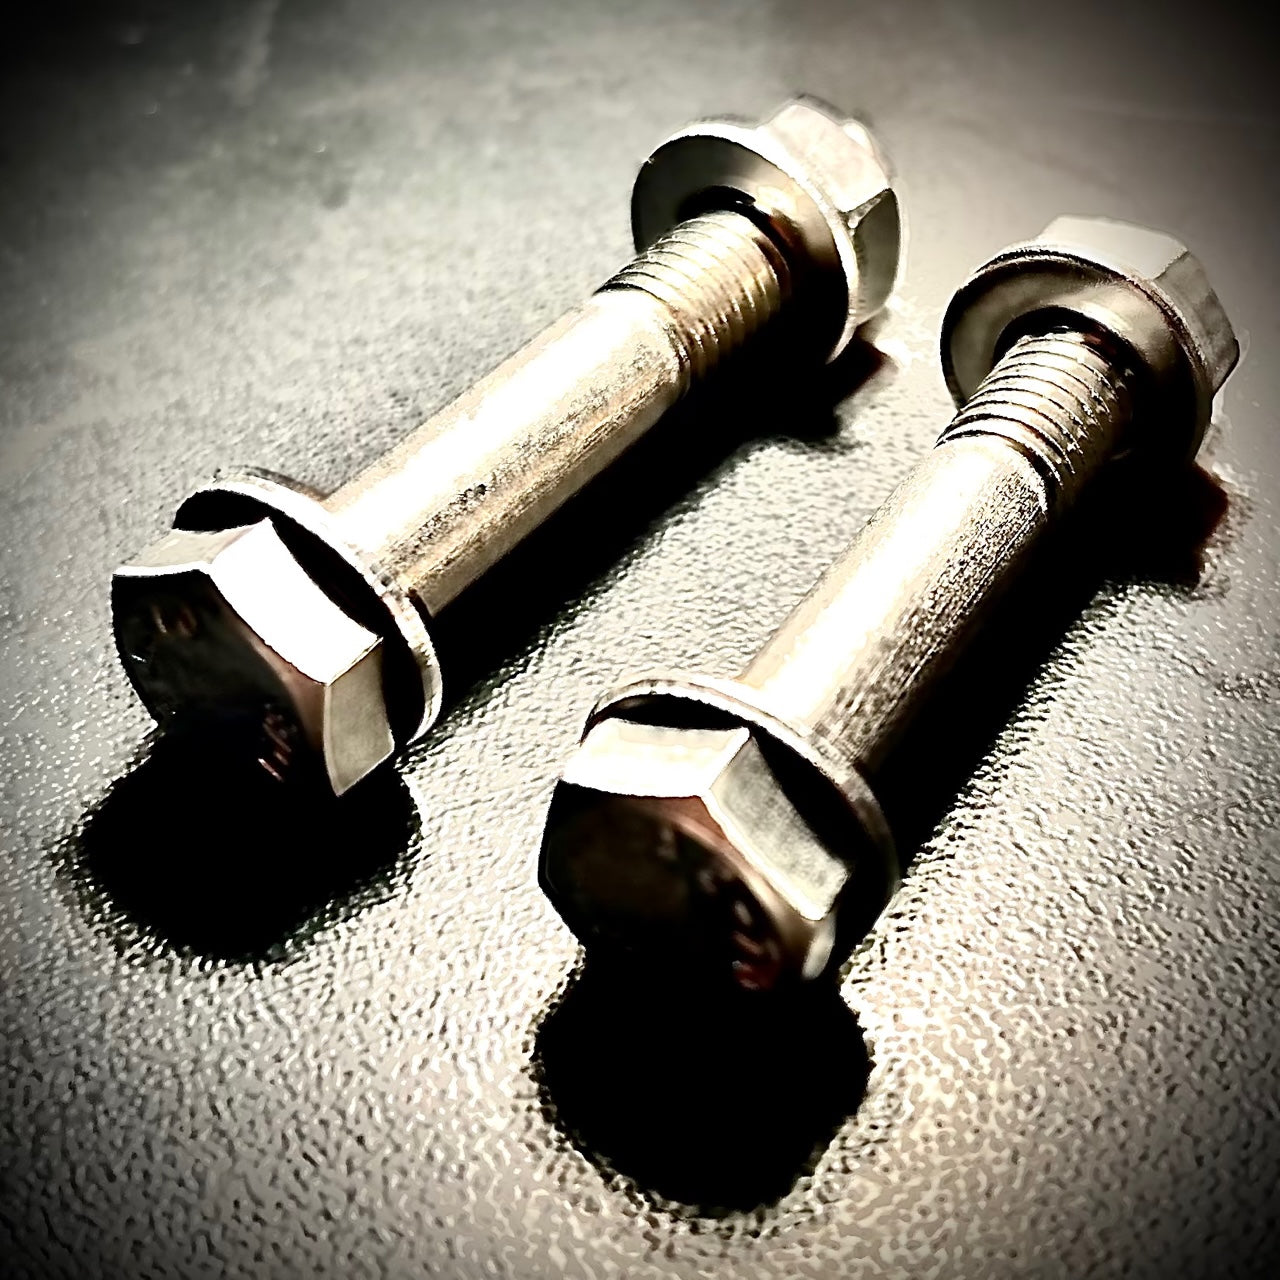 M6 x Over 75mm Hex Bolt plus Nut and Washers A2/ 304 Stainless Steel DIN 931 - Fixaball Ltd. Fixings and Fasteners UK